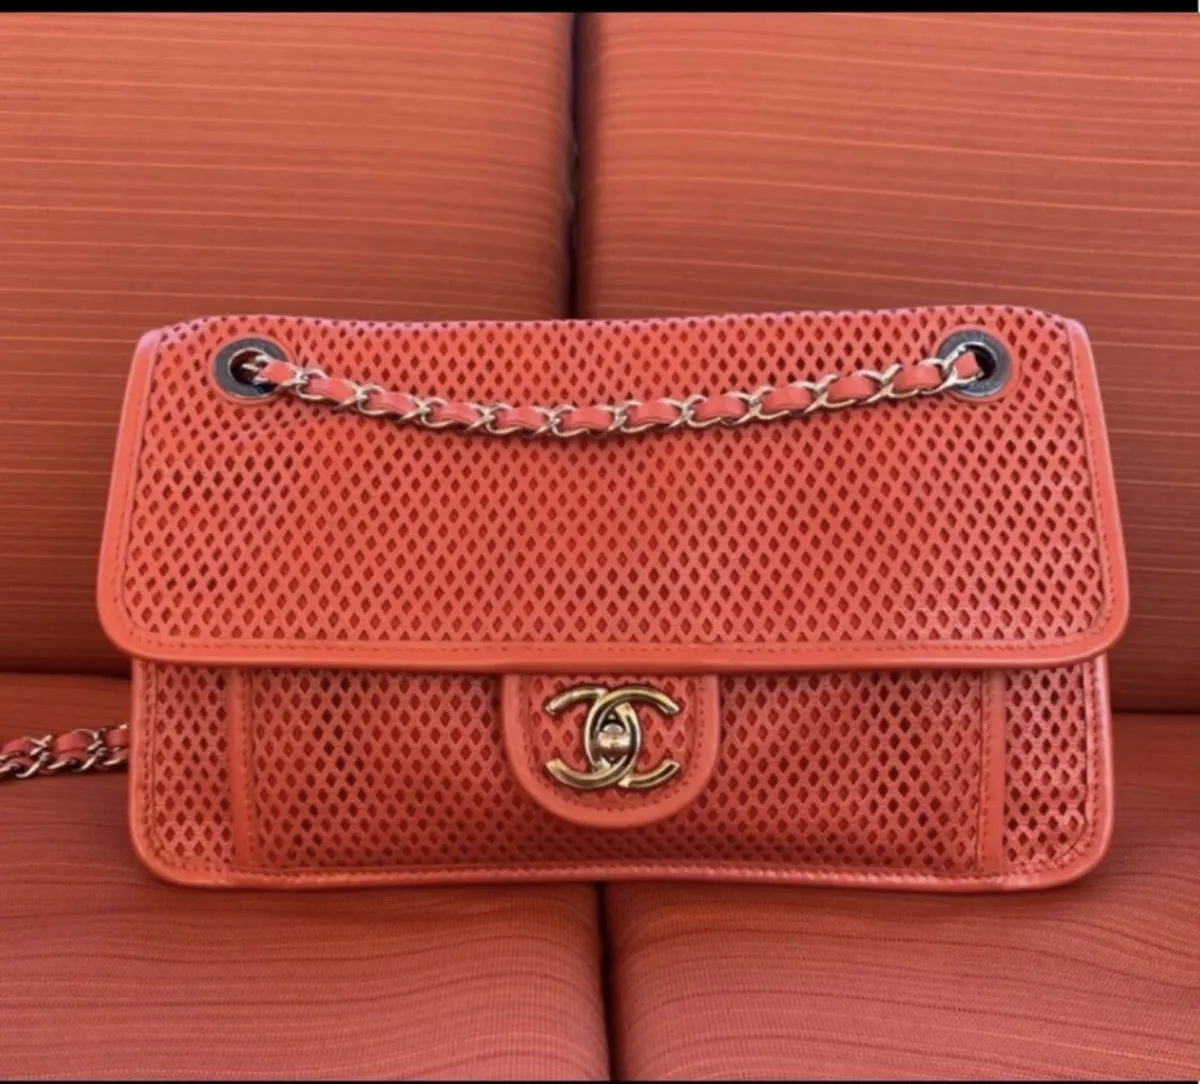 VERIFIED Authentic CHANEL Red Perforated Calfskin Leather Jumbo Flap Bag